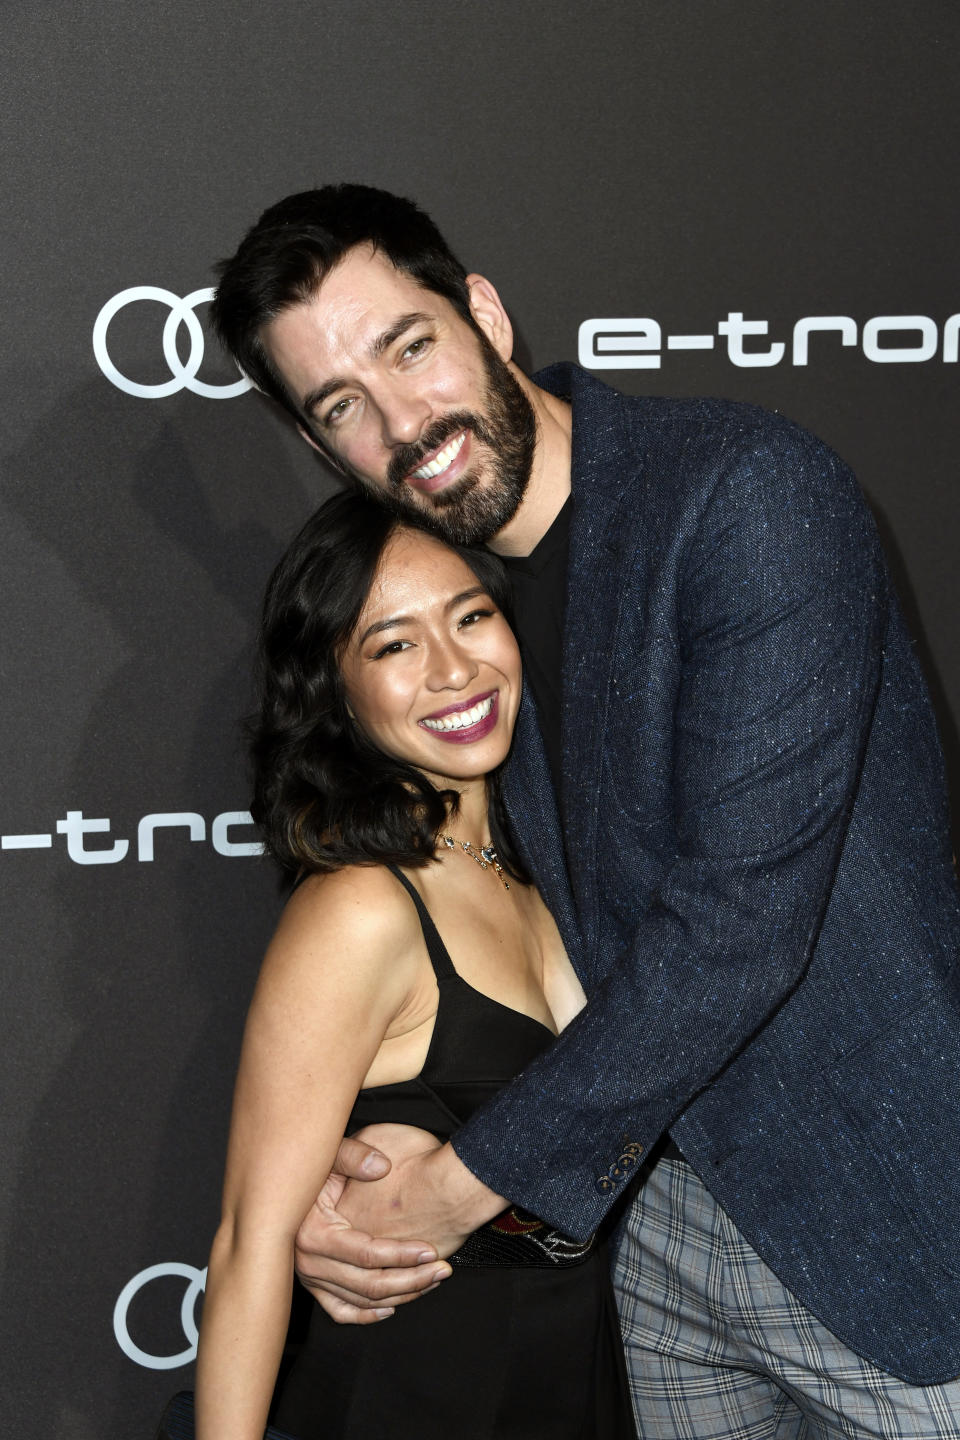 LOS ANGELES, CALIFORNIA - SEPTEMBER 19: (L-R) Linda Phan and Drew Scott are seen as Audi celebrates the 71st Emmys at Sunset Tower on September 19, 2019 in Los Angeles, California. (Photo by Frazer Harrison/Getty Images)